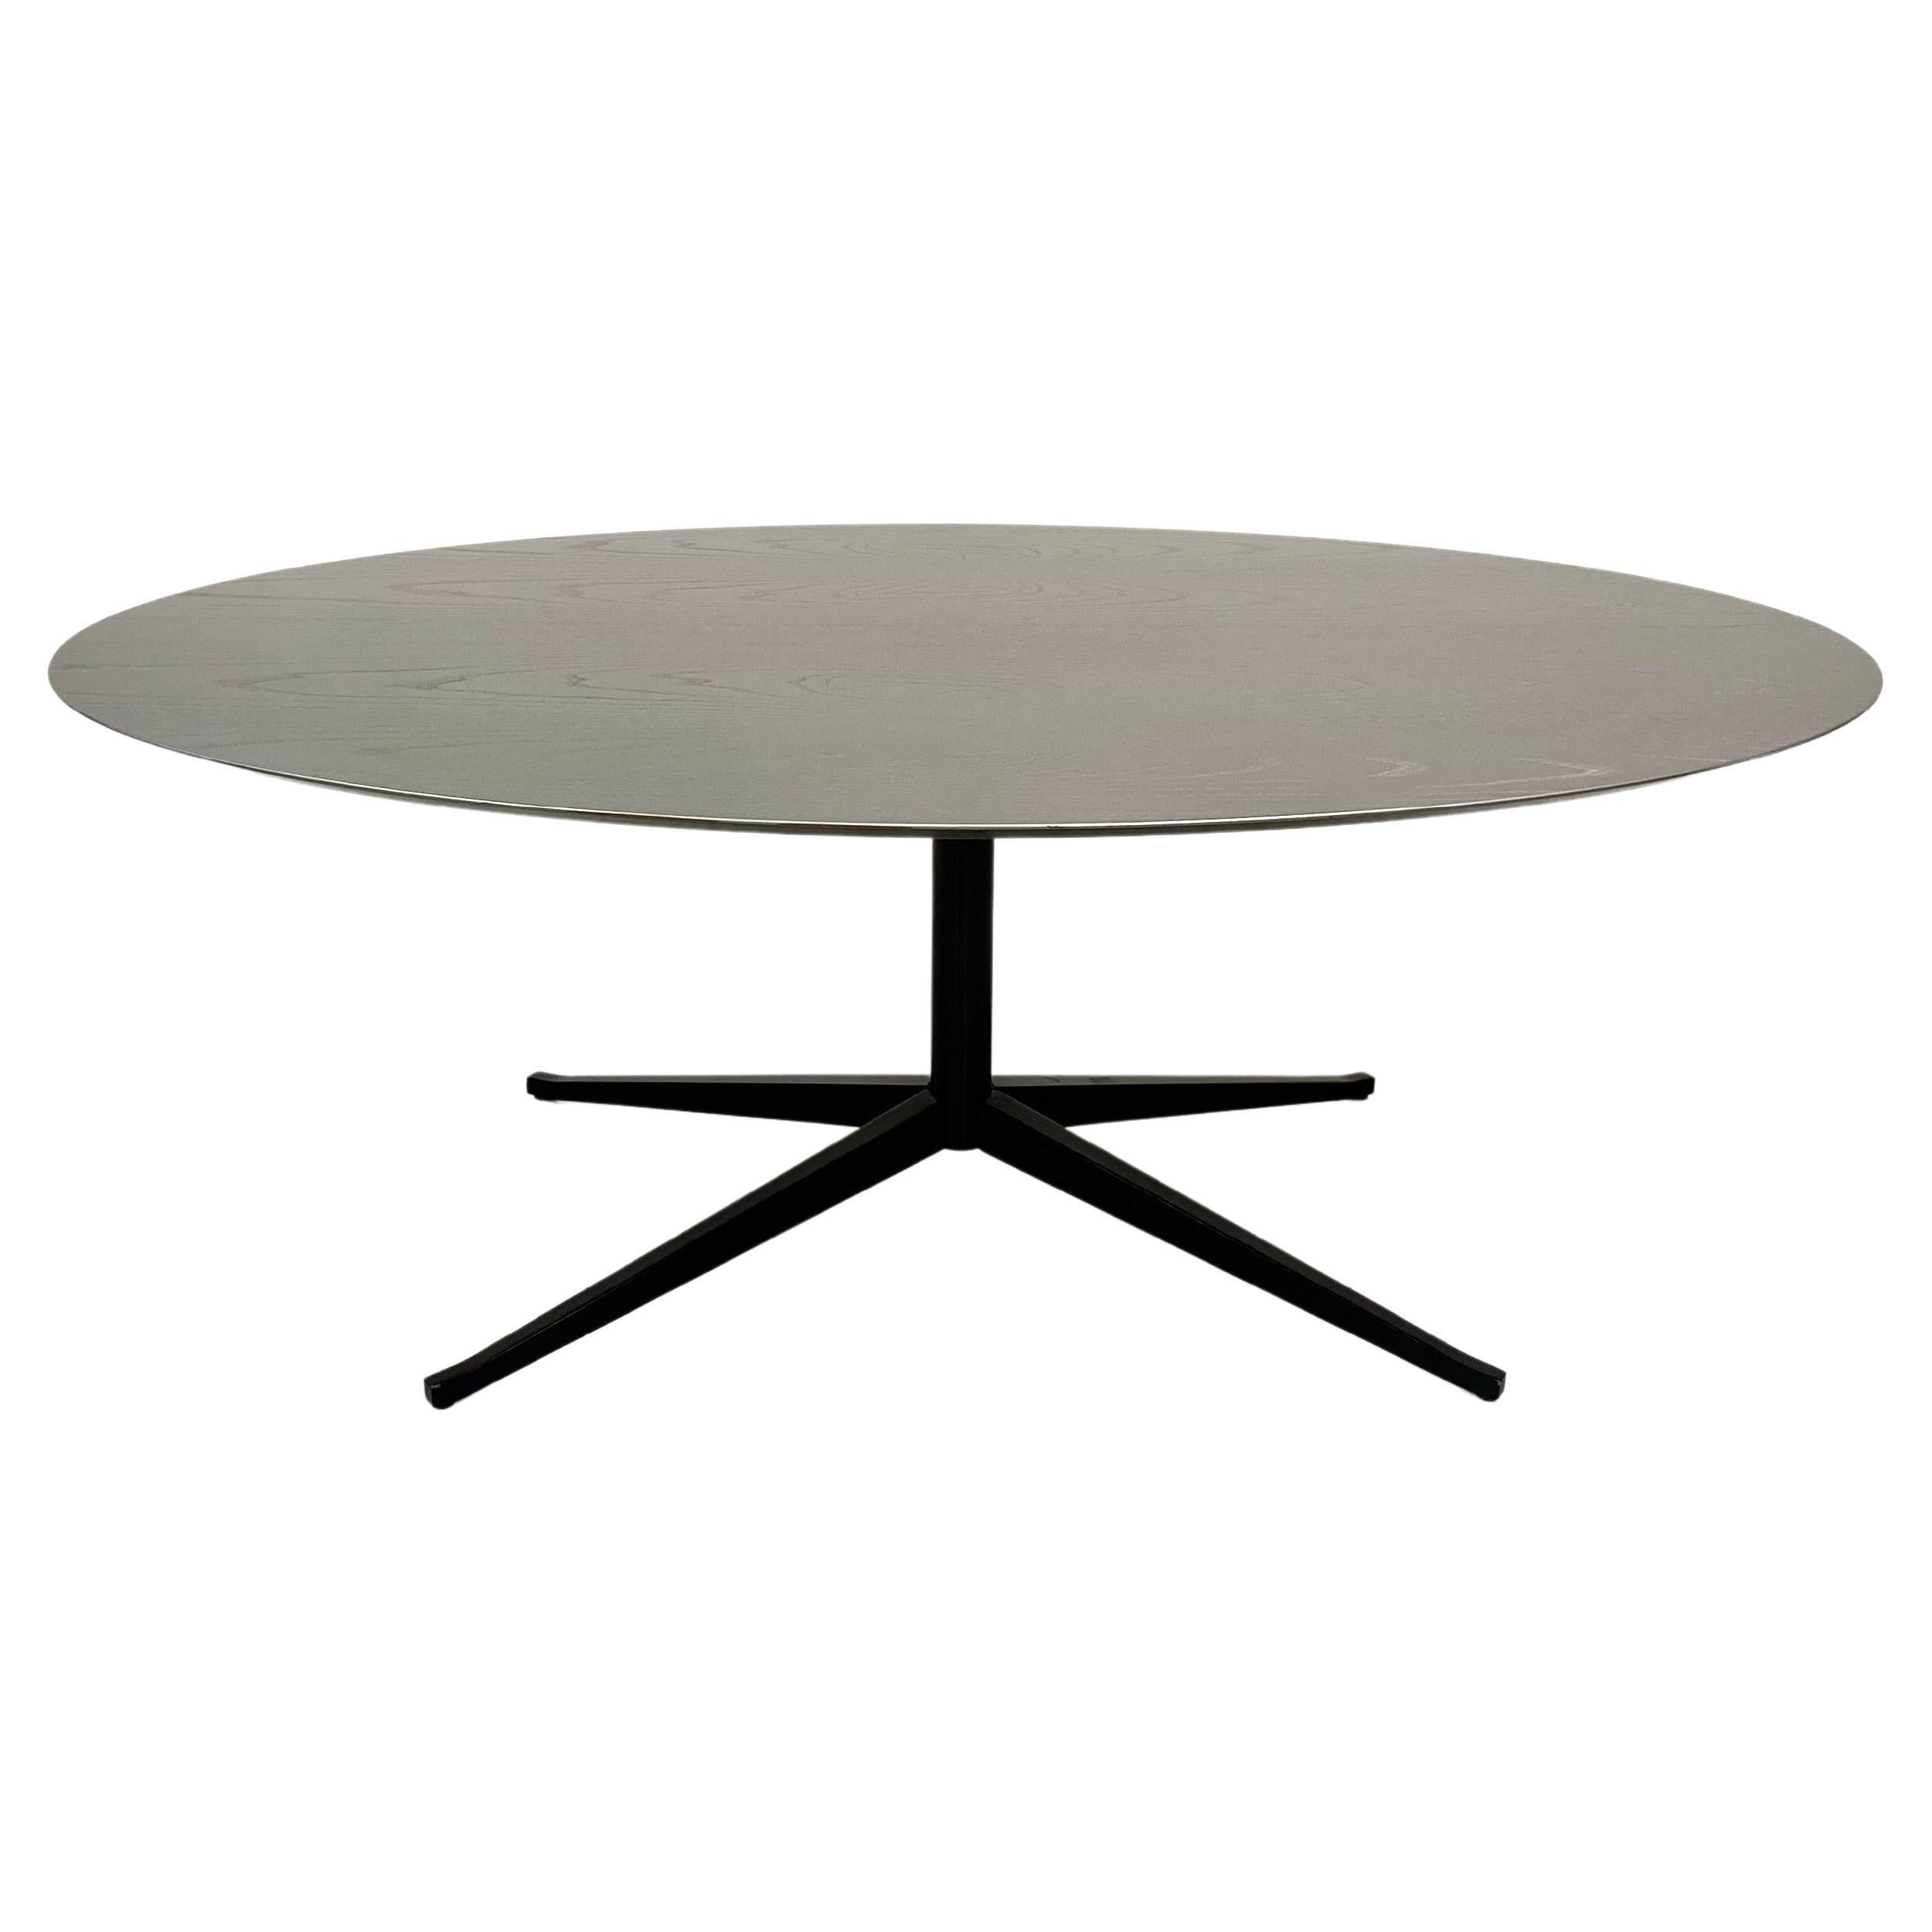 This particular Florence Knoll oval table desk is designed by Florence Knoll for Knoll in 1961. This rare edition with a silver lacquered top and solid black base in very good condition. 

Florence Knoll described her designs as the fill-in pieces